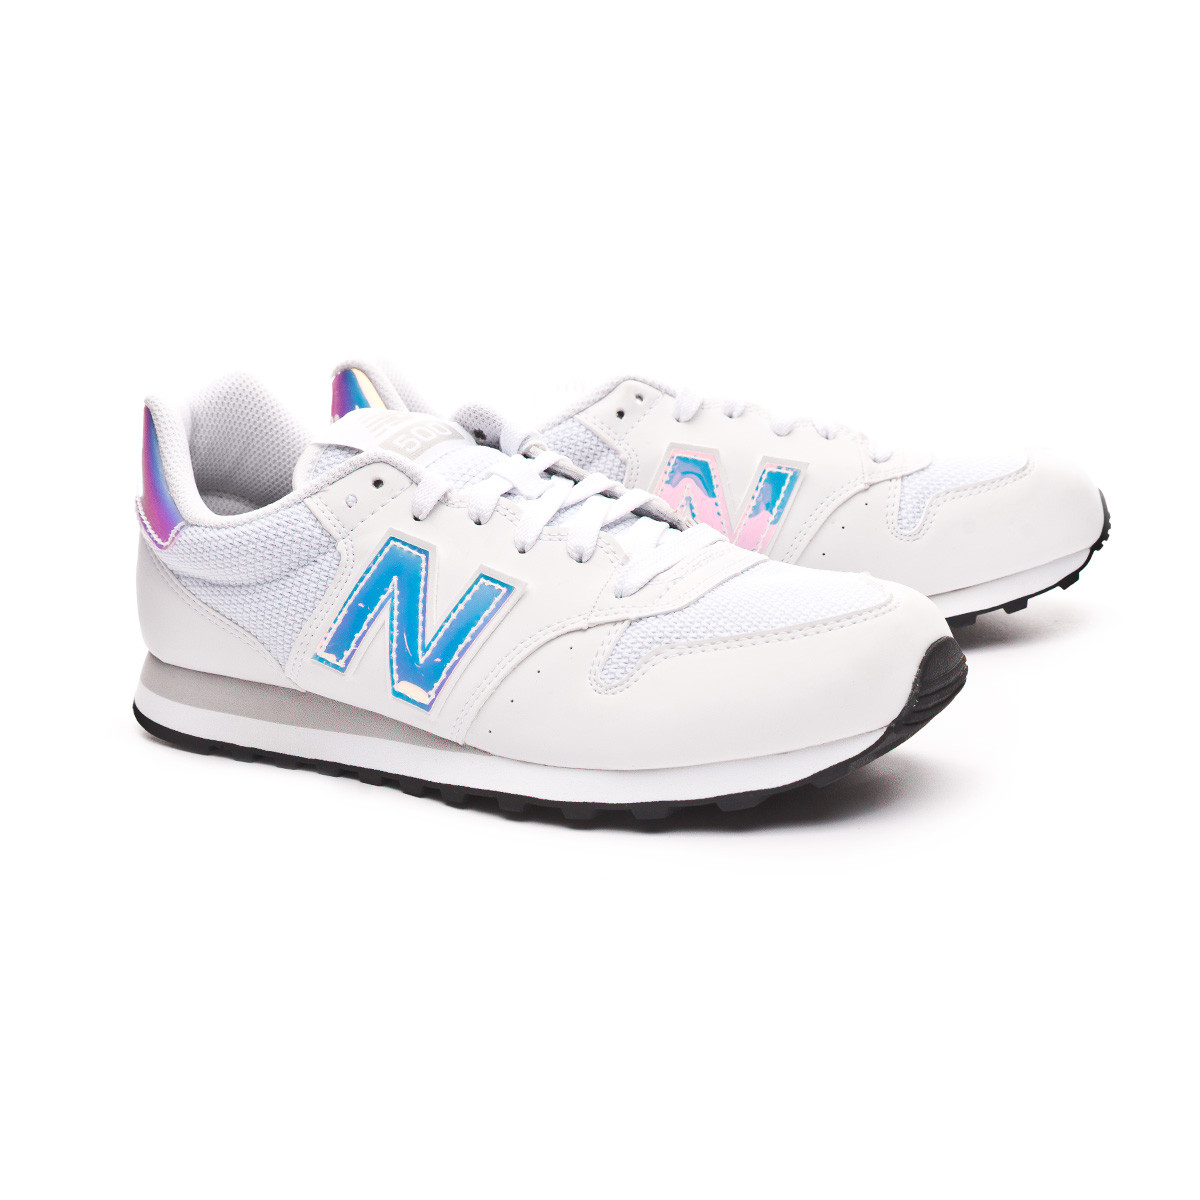 New Balance 500 Trainers In White Clearance Sale, UP TO 51% OFF